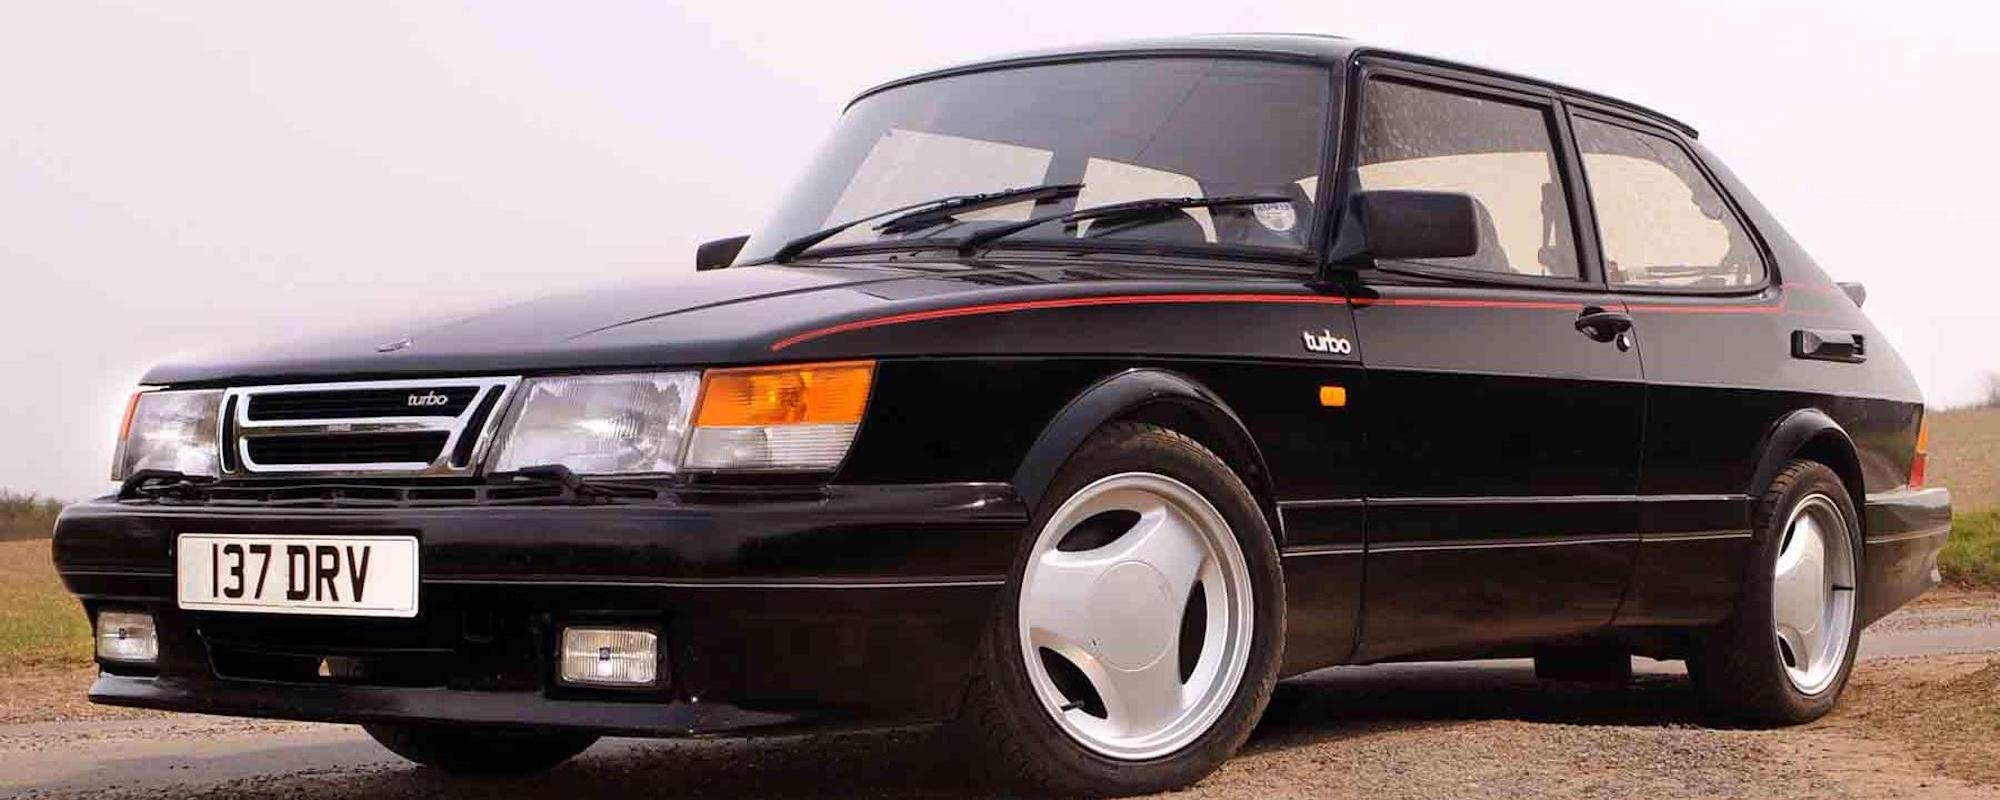 This Week in Cars: Five Classic Cars From Sweden Including the SAAB 900  Turbo and a Bertone-Designed Volvo - Dyler